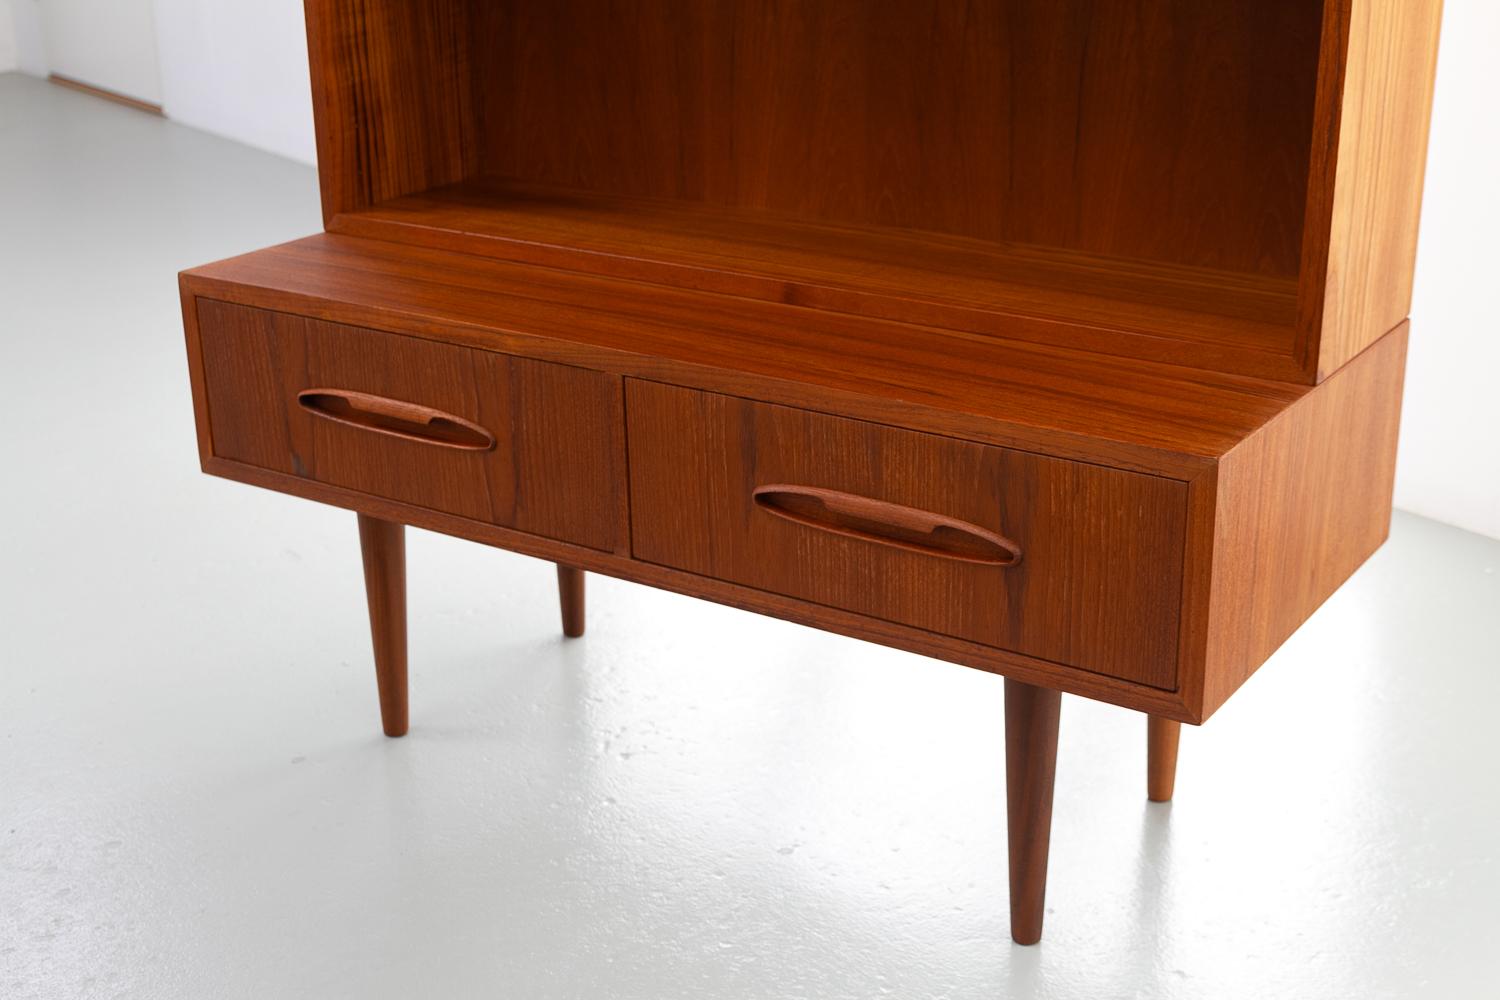 Danish Modern Teak Bookcase, 1960s.

Scandinavian Mid-Century Modern bookcase in teak. Lower part with two wide drawers. Sculpted pulls in solid teak. Upper part has three height adjustable shelves. Depth of shelves 22.5 cm.
Standing on four round